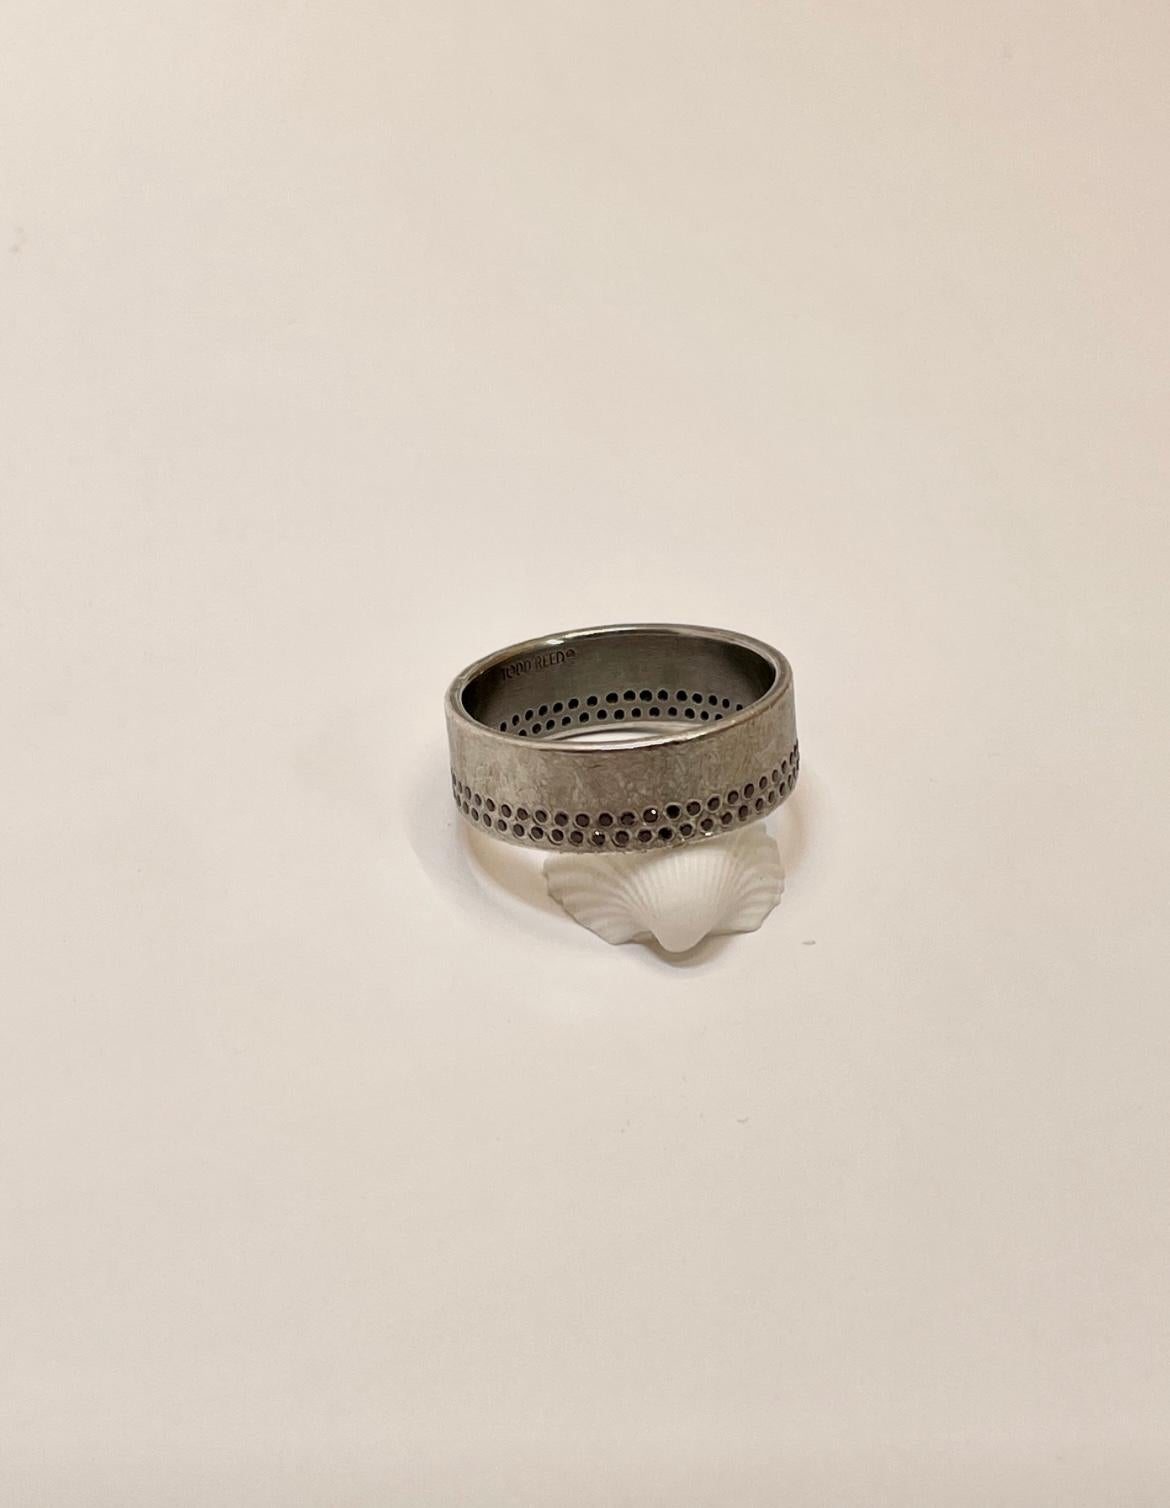 Lightly worn one of a kind mens fashion ring.  This ring would also make a very great and contemporary wedding band.  The design uses a sterling silver core with a 950 Palladium overlay on the surface.  Palladium gives the ring its cool gray blue